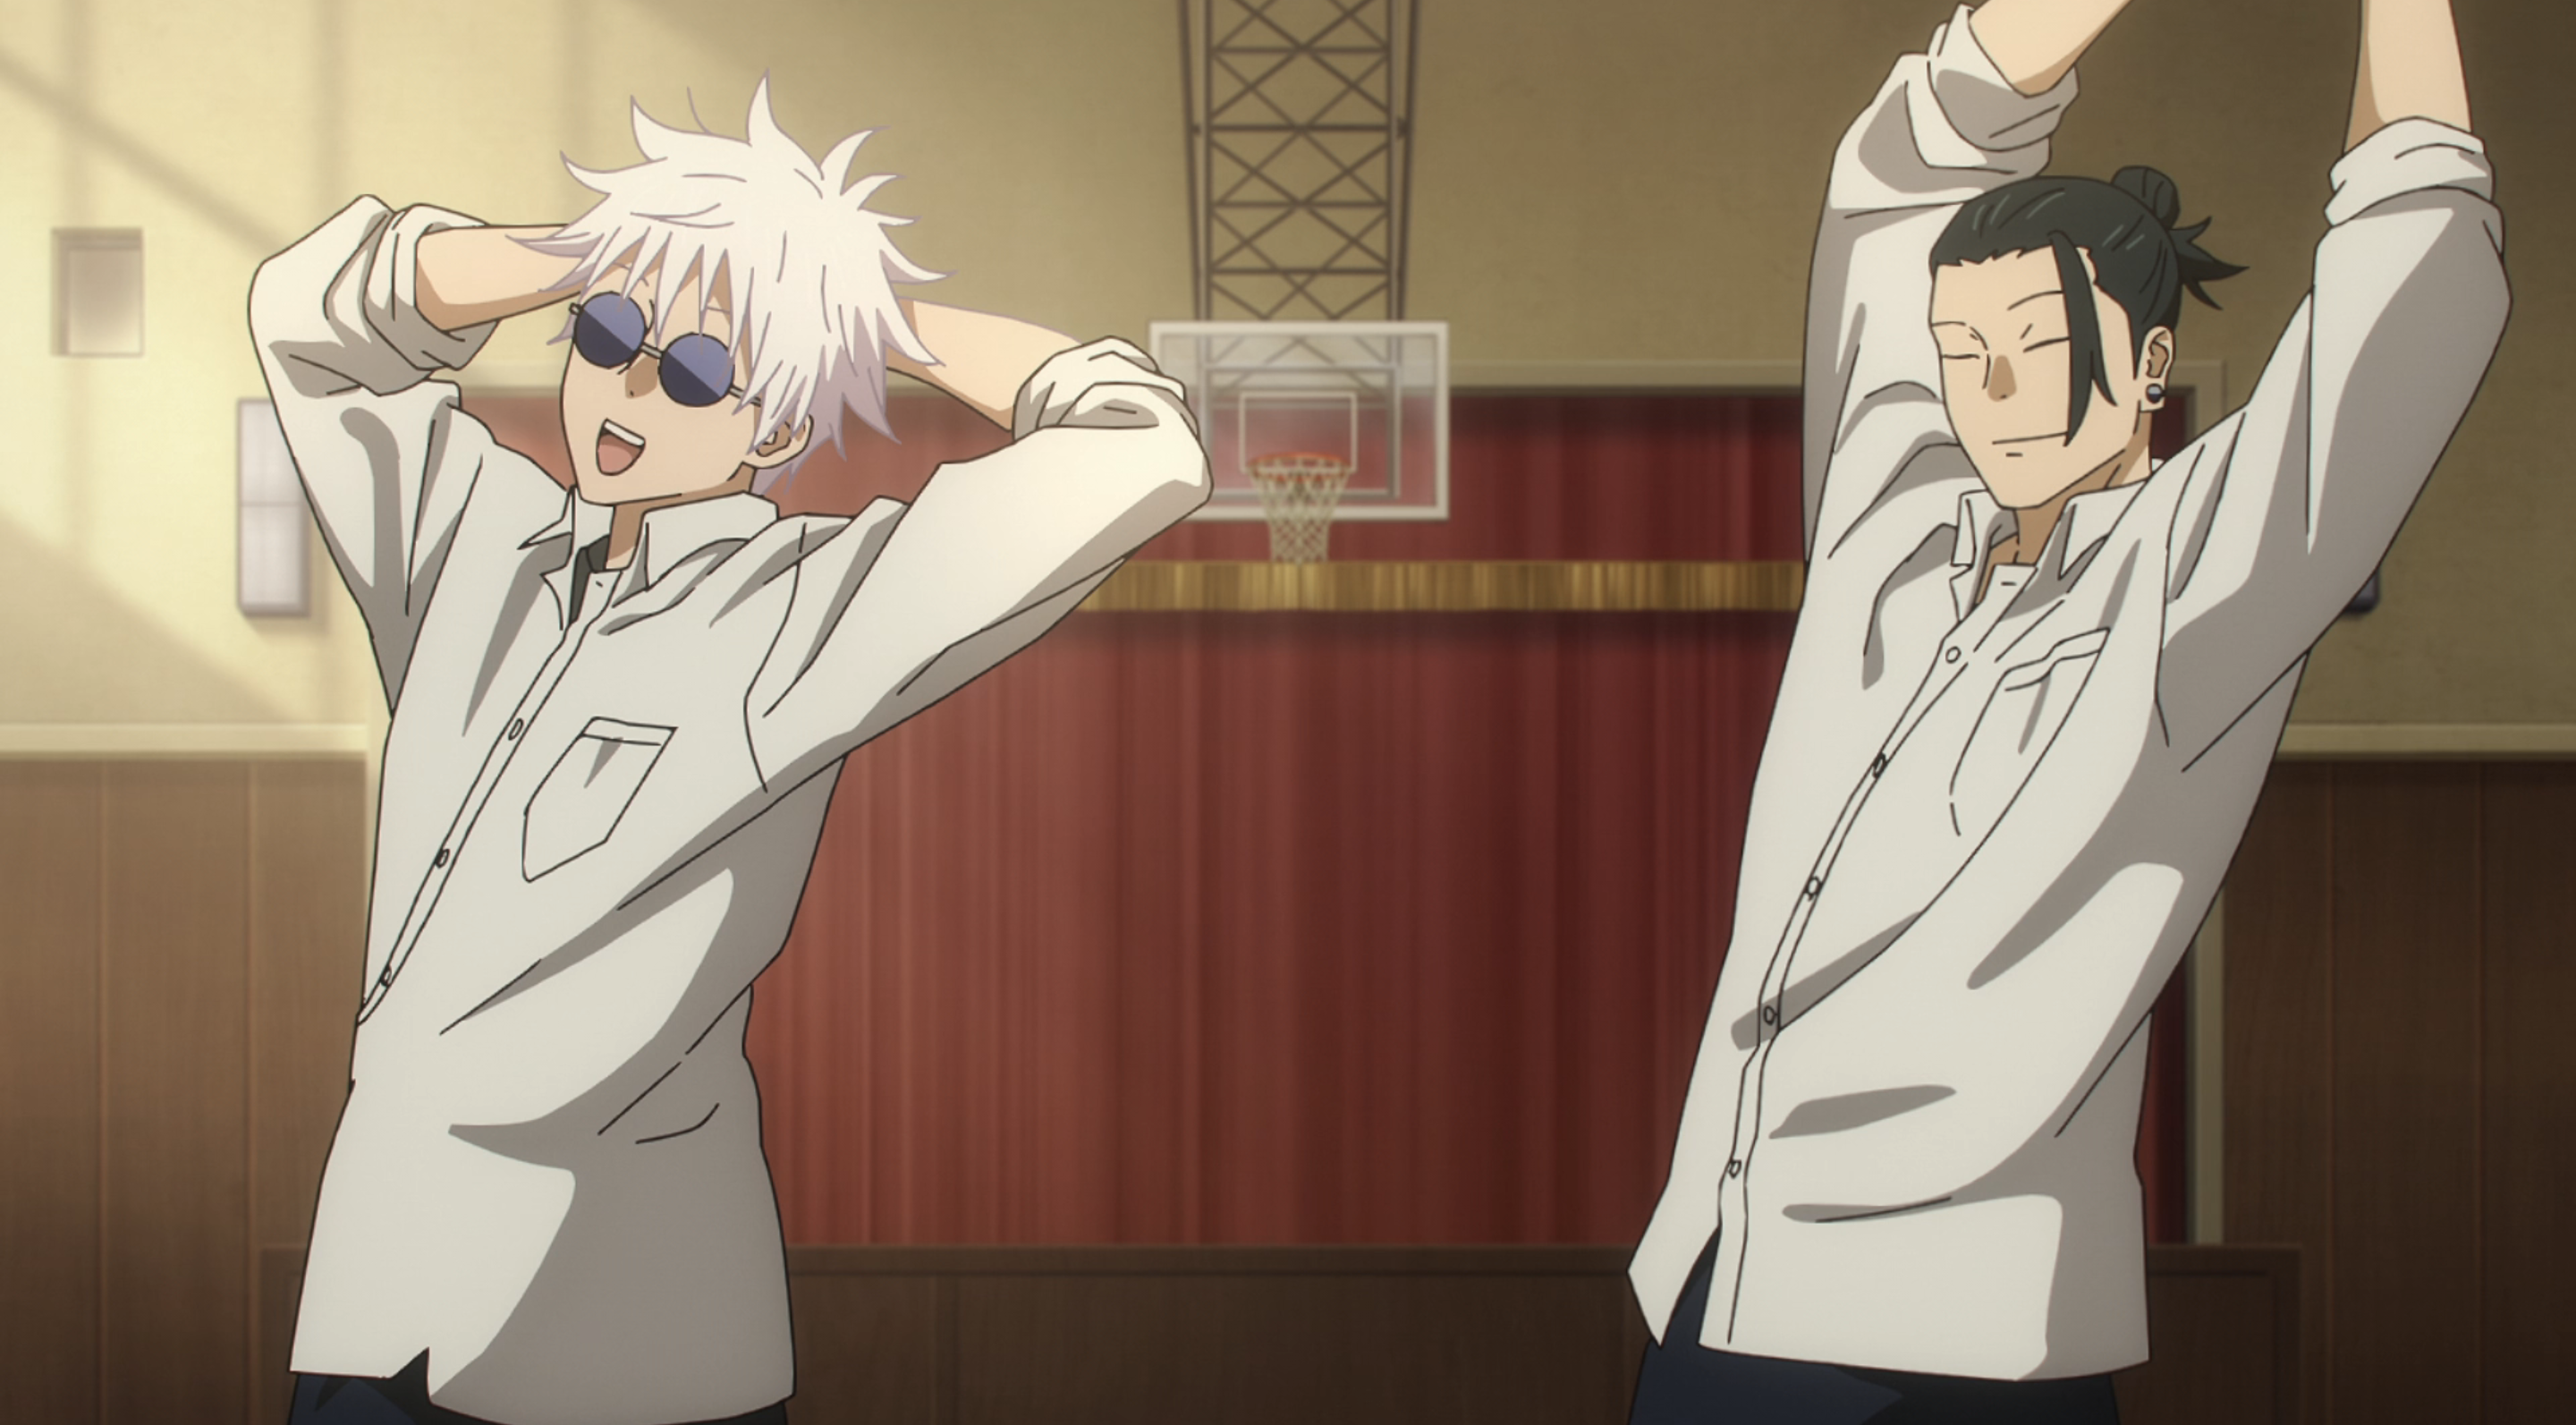 An image of Saturo Gojo and Suguru Geto standing in a school gym in Jujutsu Kaisen season 2. The two look relaxed and happy hanging out with eachother. 